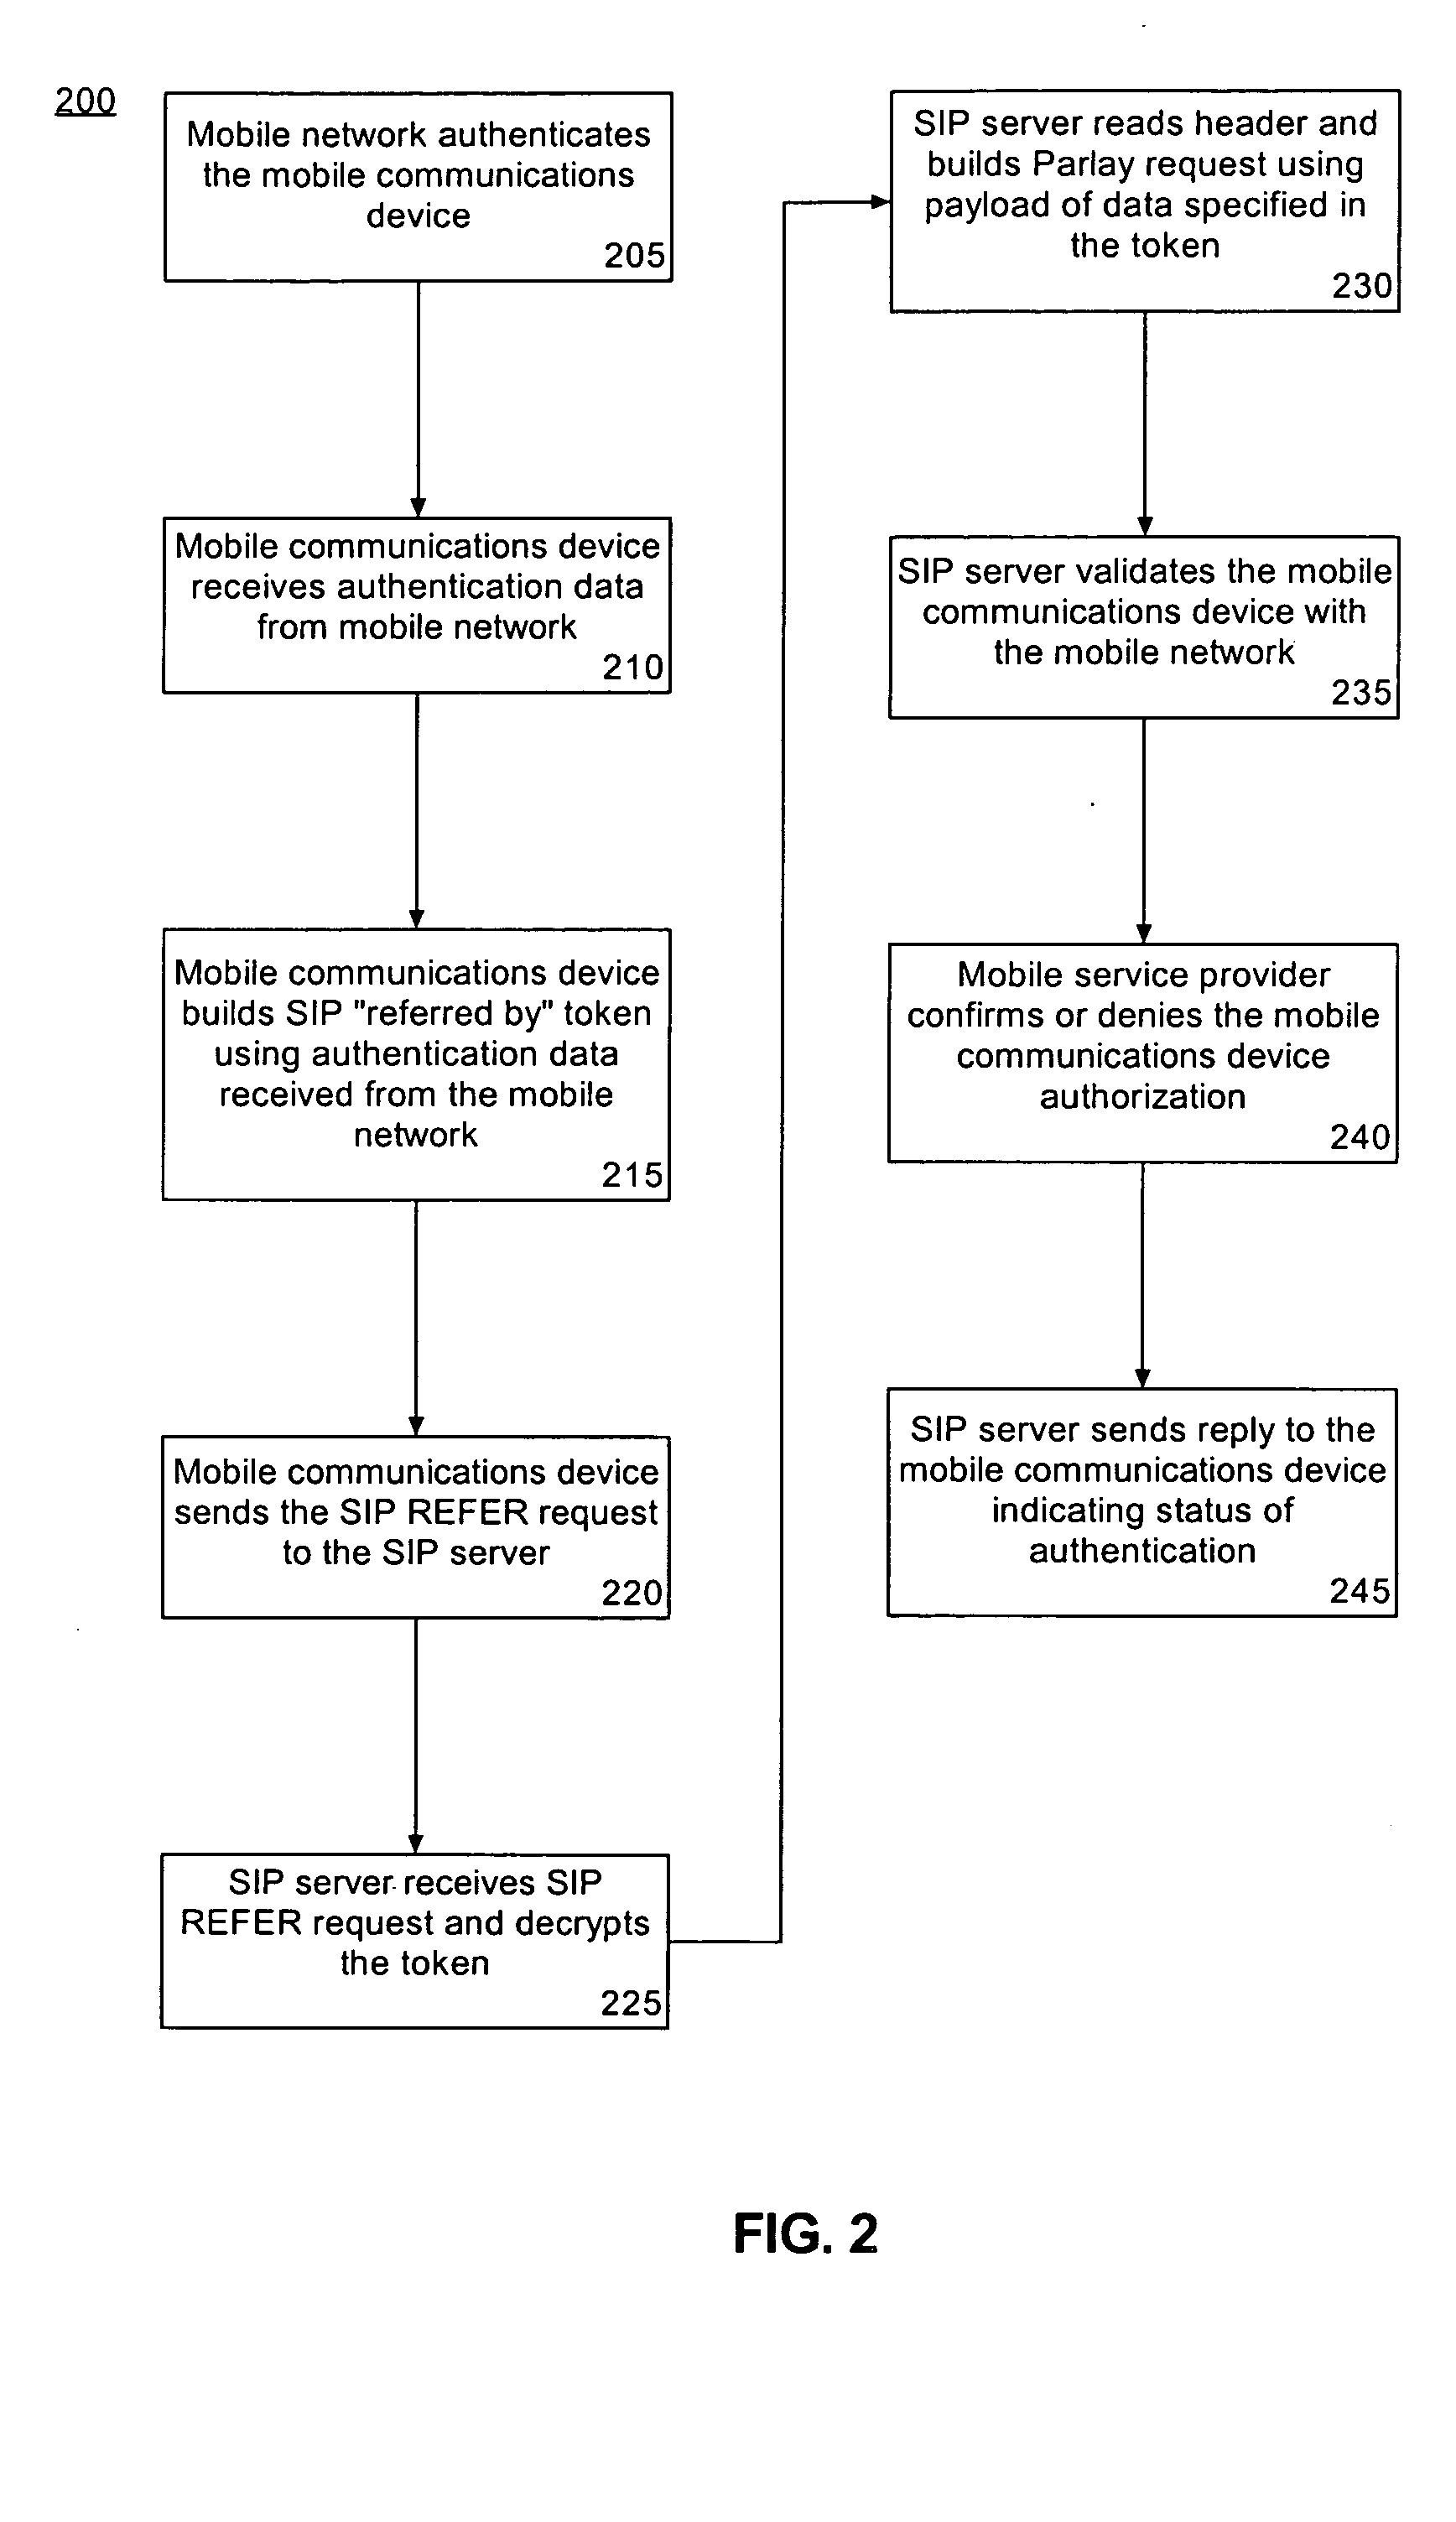 Authentication of mobile communication devices using mobile networks, SIP and Parlay